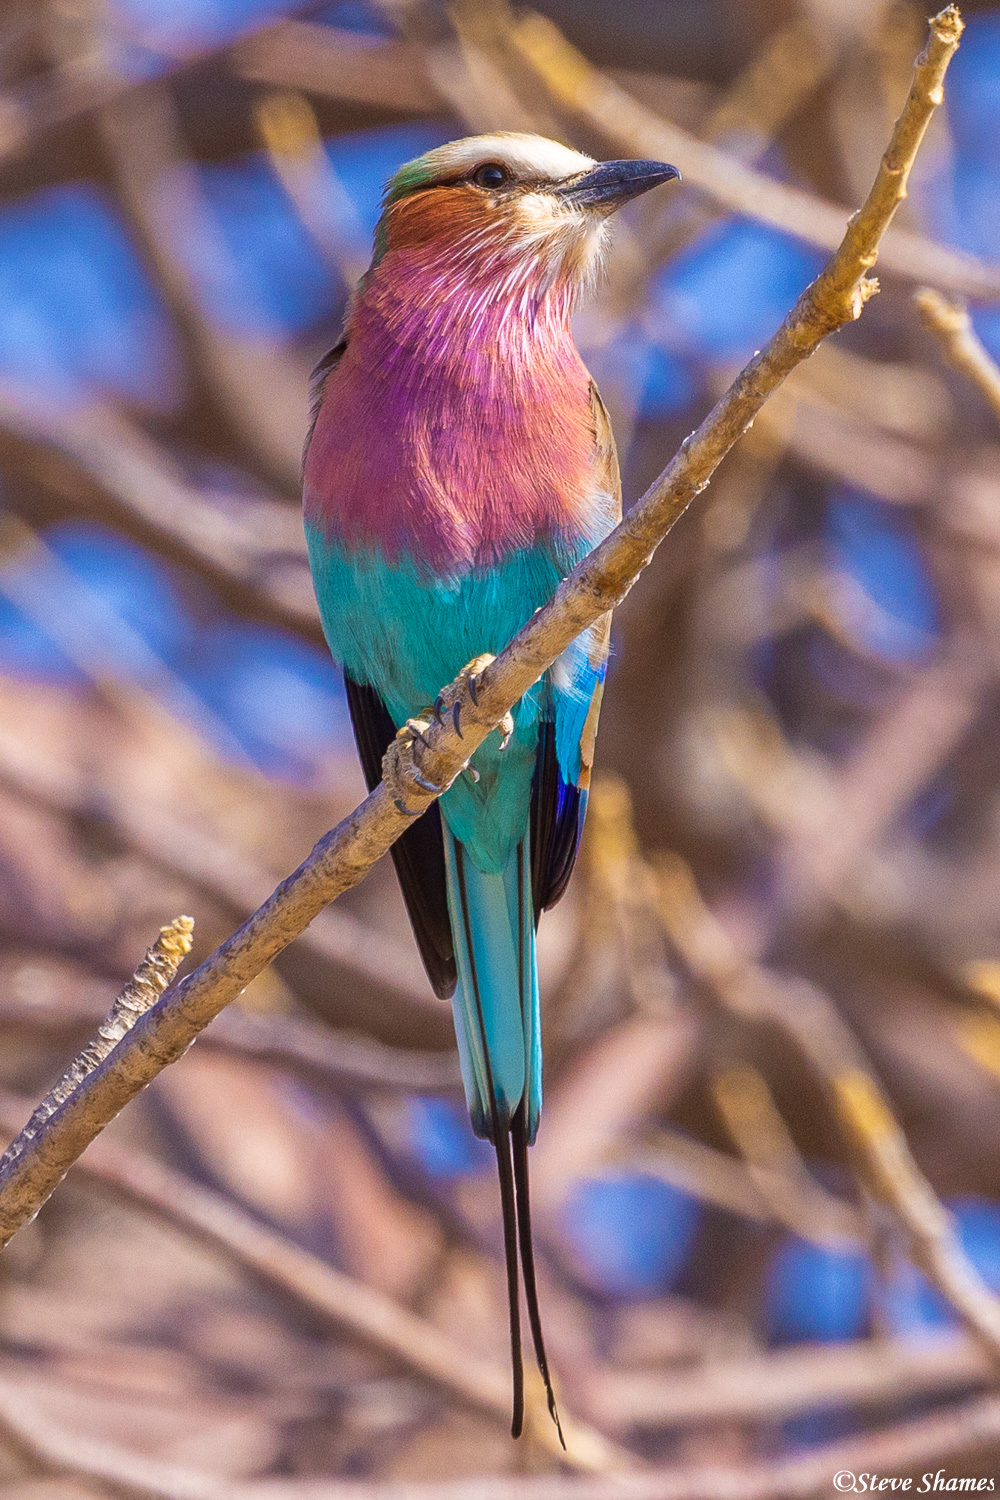 This colorful little bird is the lilac breasted roller.